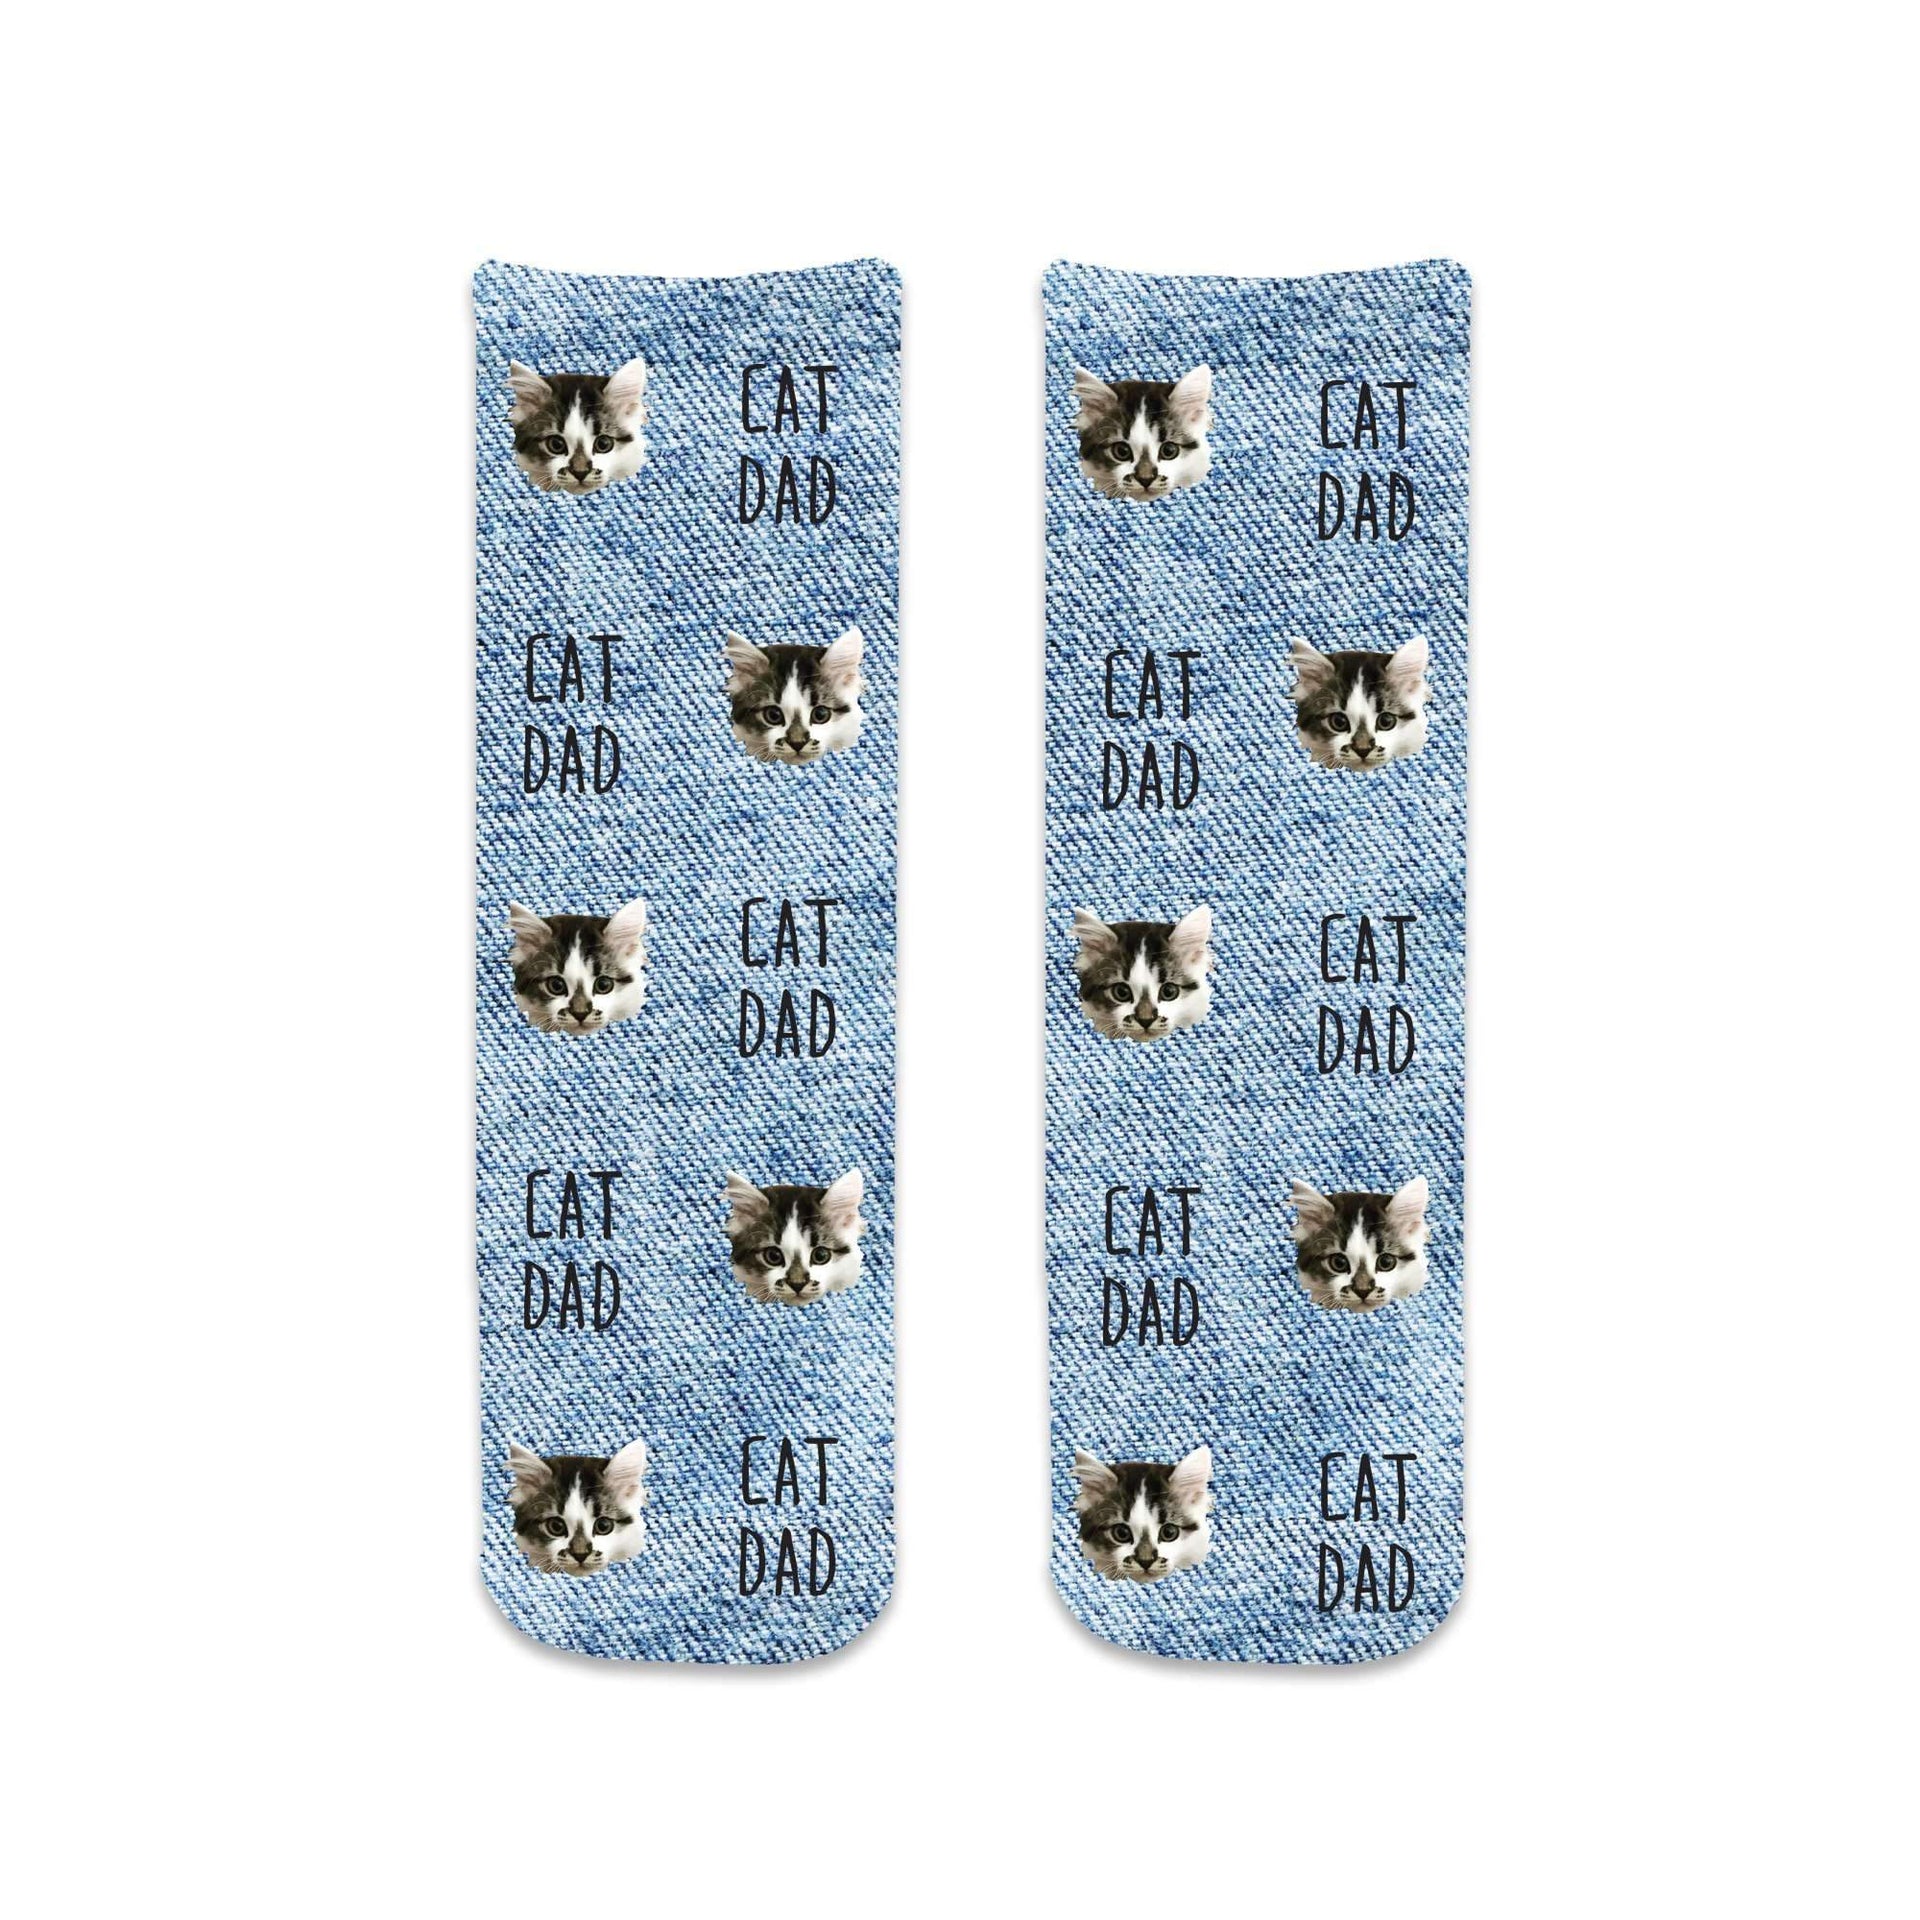 Custom cat face socks for the cat Dad, custom printed on short cotton crew socks makes a great gift.